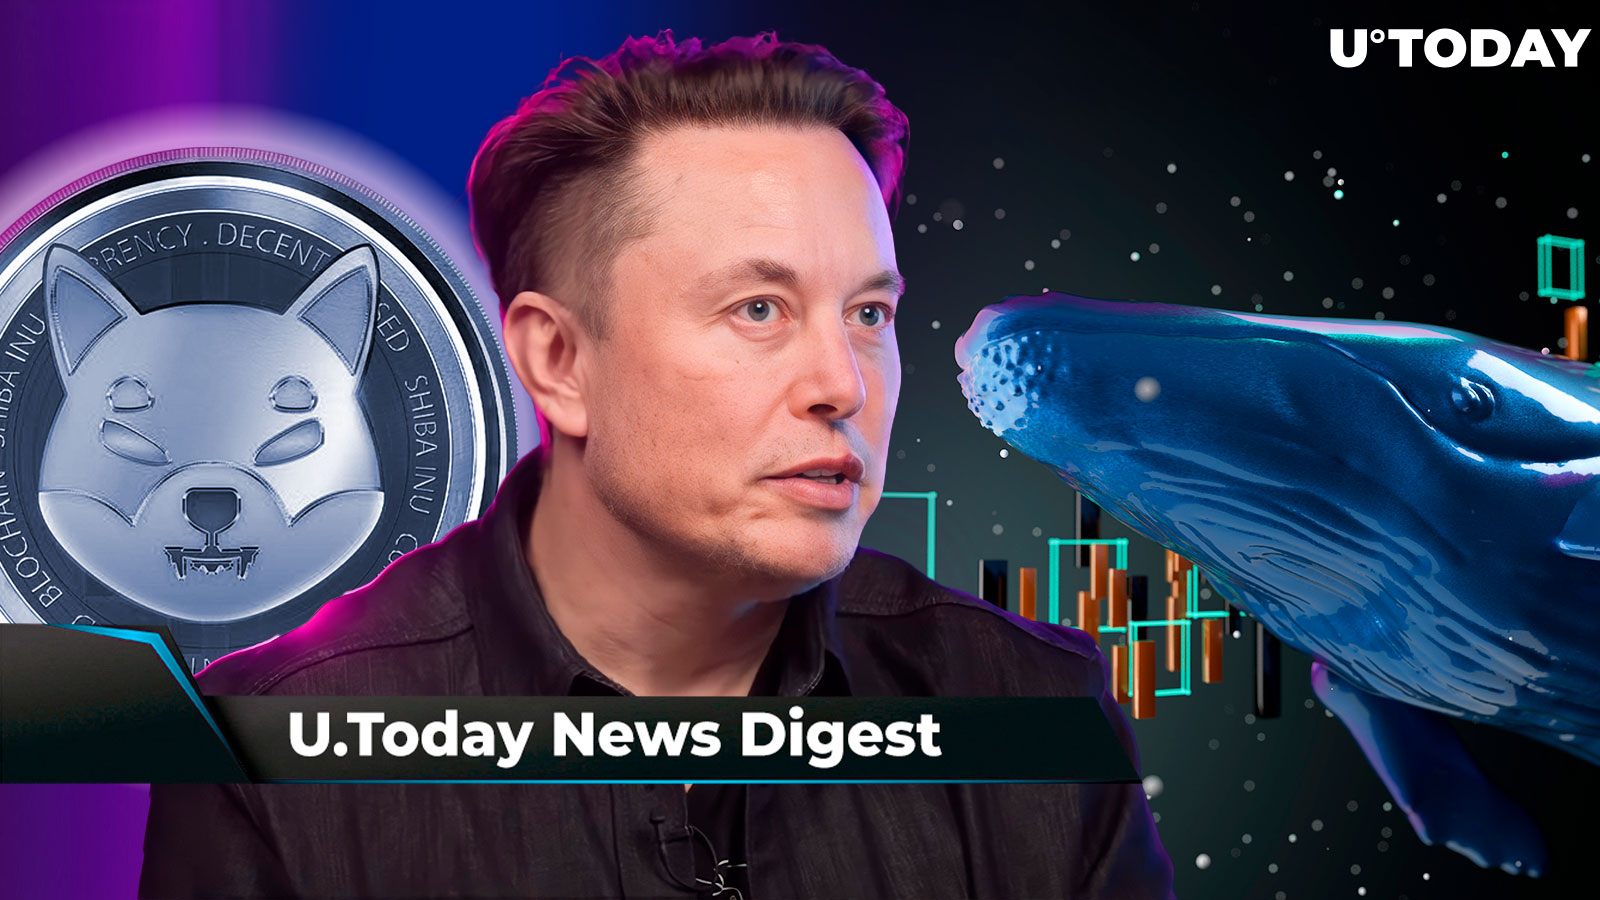 Elon Musk Makes Unexpected Shiba Inu Mention, New Indicator Shows SHIB Popular Among New Investors, Whales Move 49 Billion SHIB: Crypto News Digest by U.Today